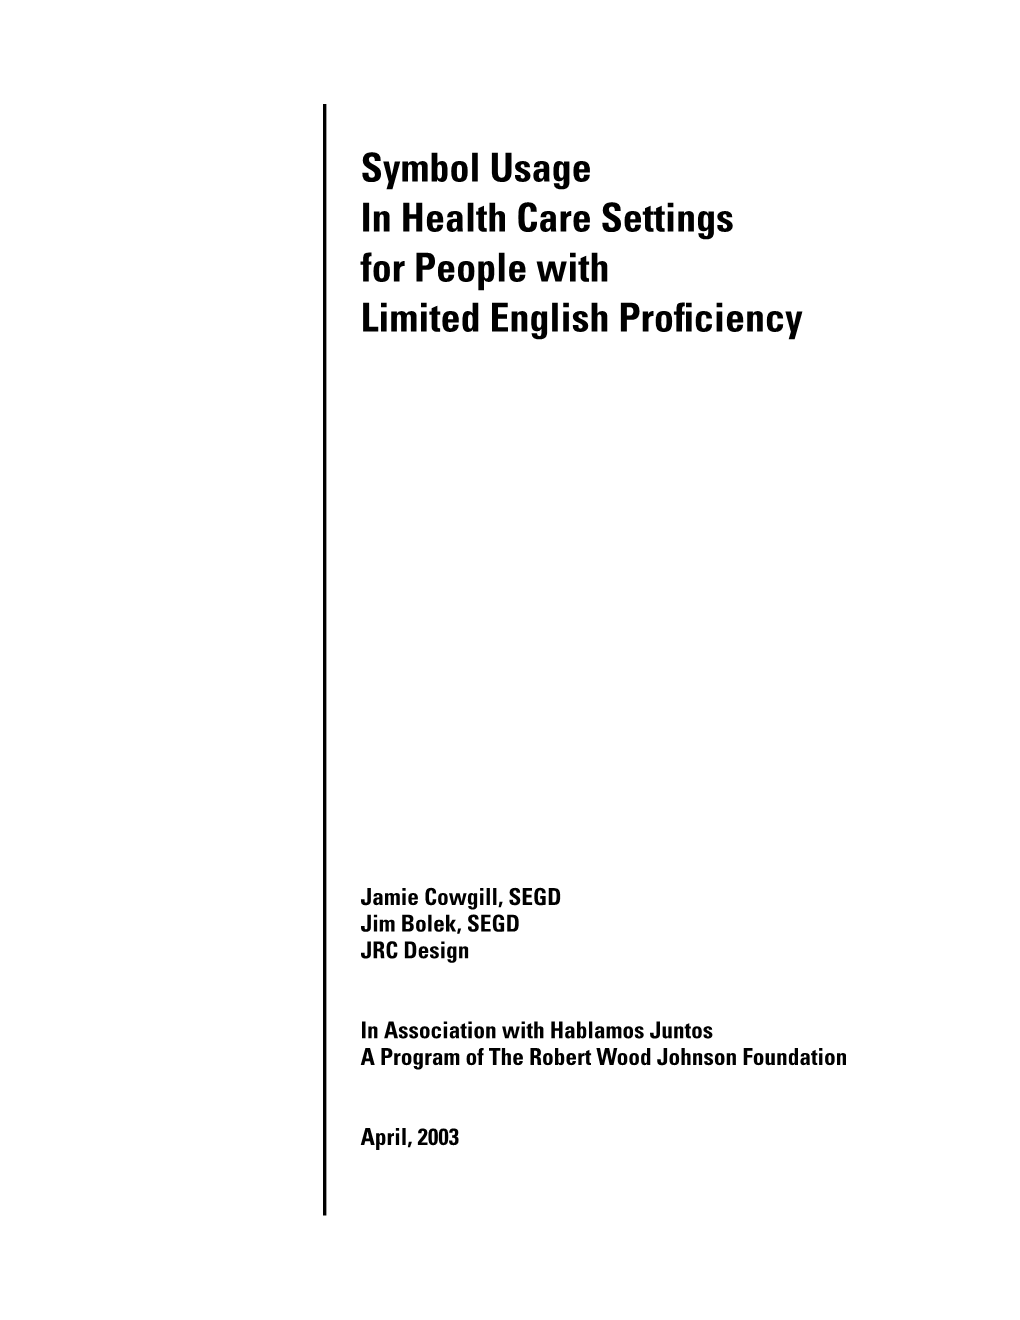 Symbol Usage in Health Care Settings for People with Limited English Proﬁ Ciency